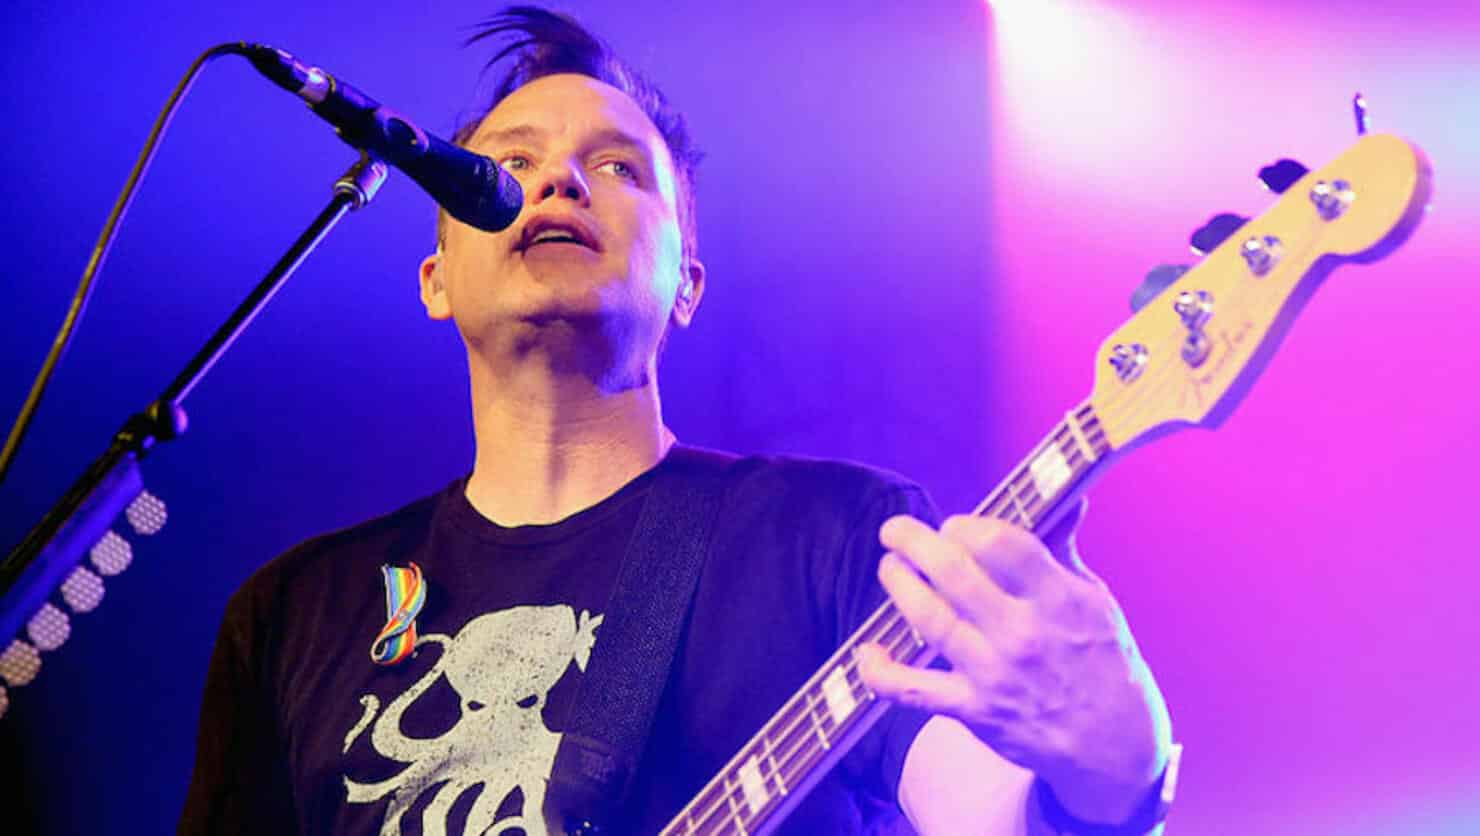 BLINK-182’s’s MARK HOPPUS Says Chemotherapy Has Him Like ‘A Poisoned Electrified Zombie’